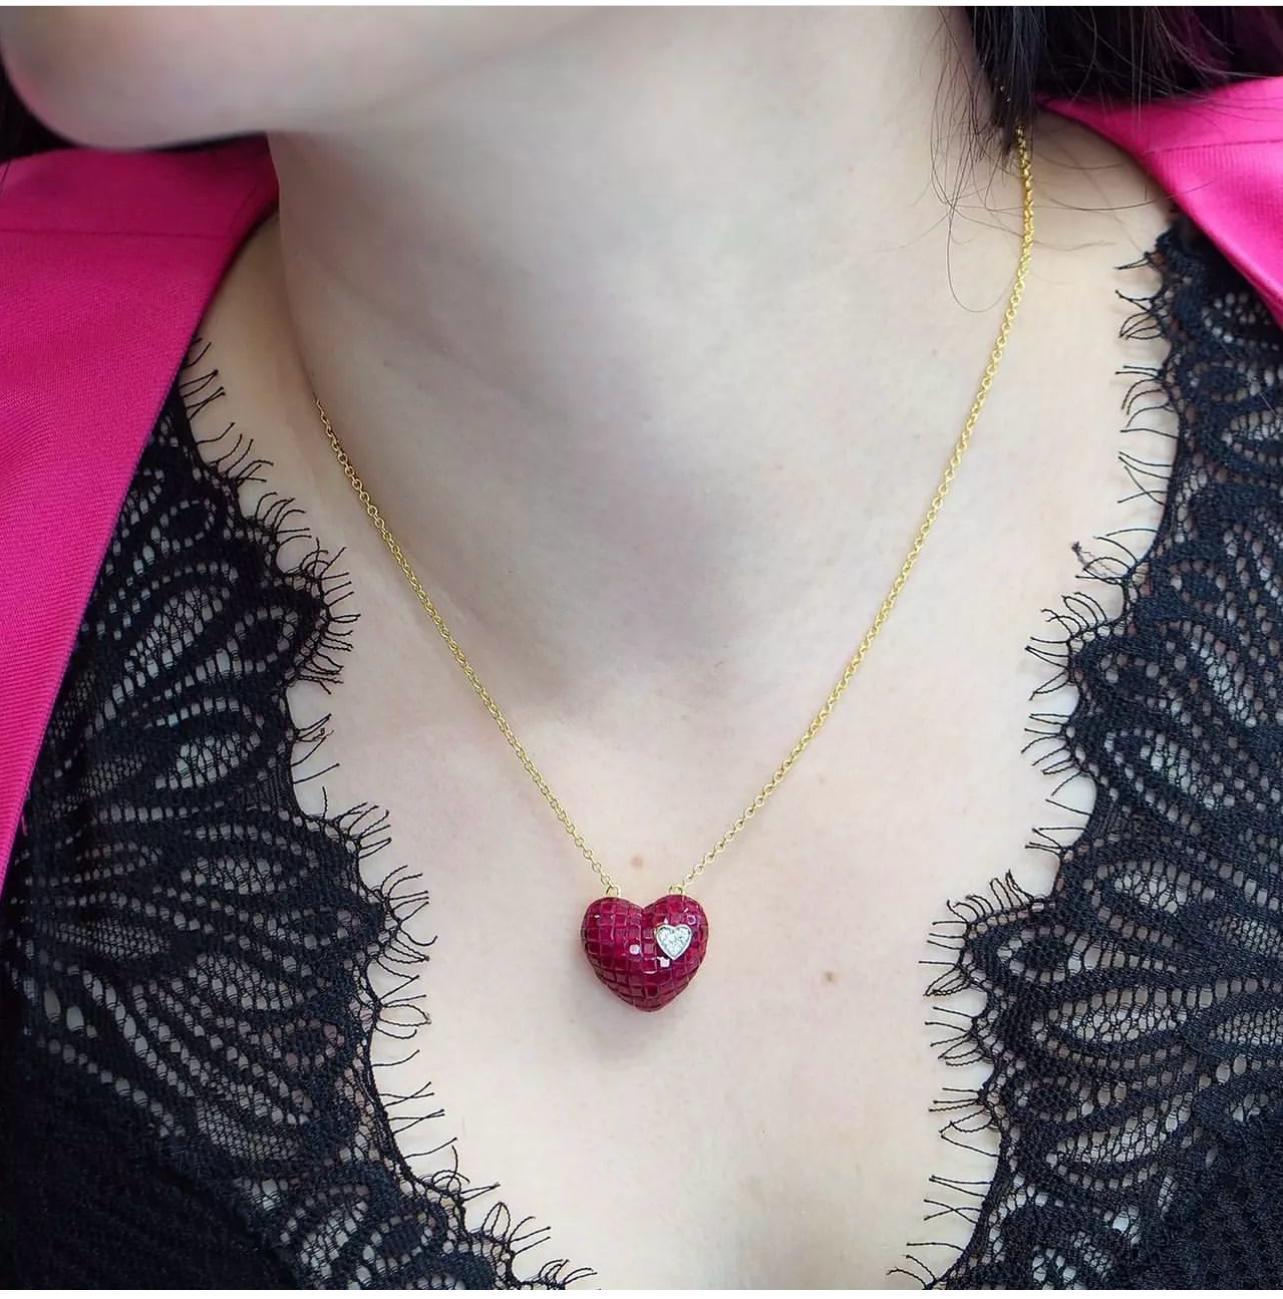 Necklace made in 18kt Yellow gold with high quality natural rubies each handpicked of good quality & cut & grooved further to perfection & set on this Necklace full of mysteries.
This setting is also popular as Mystery setting due to this